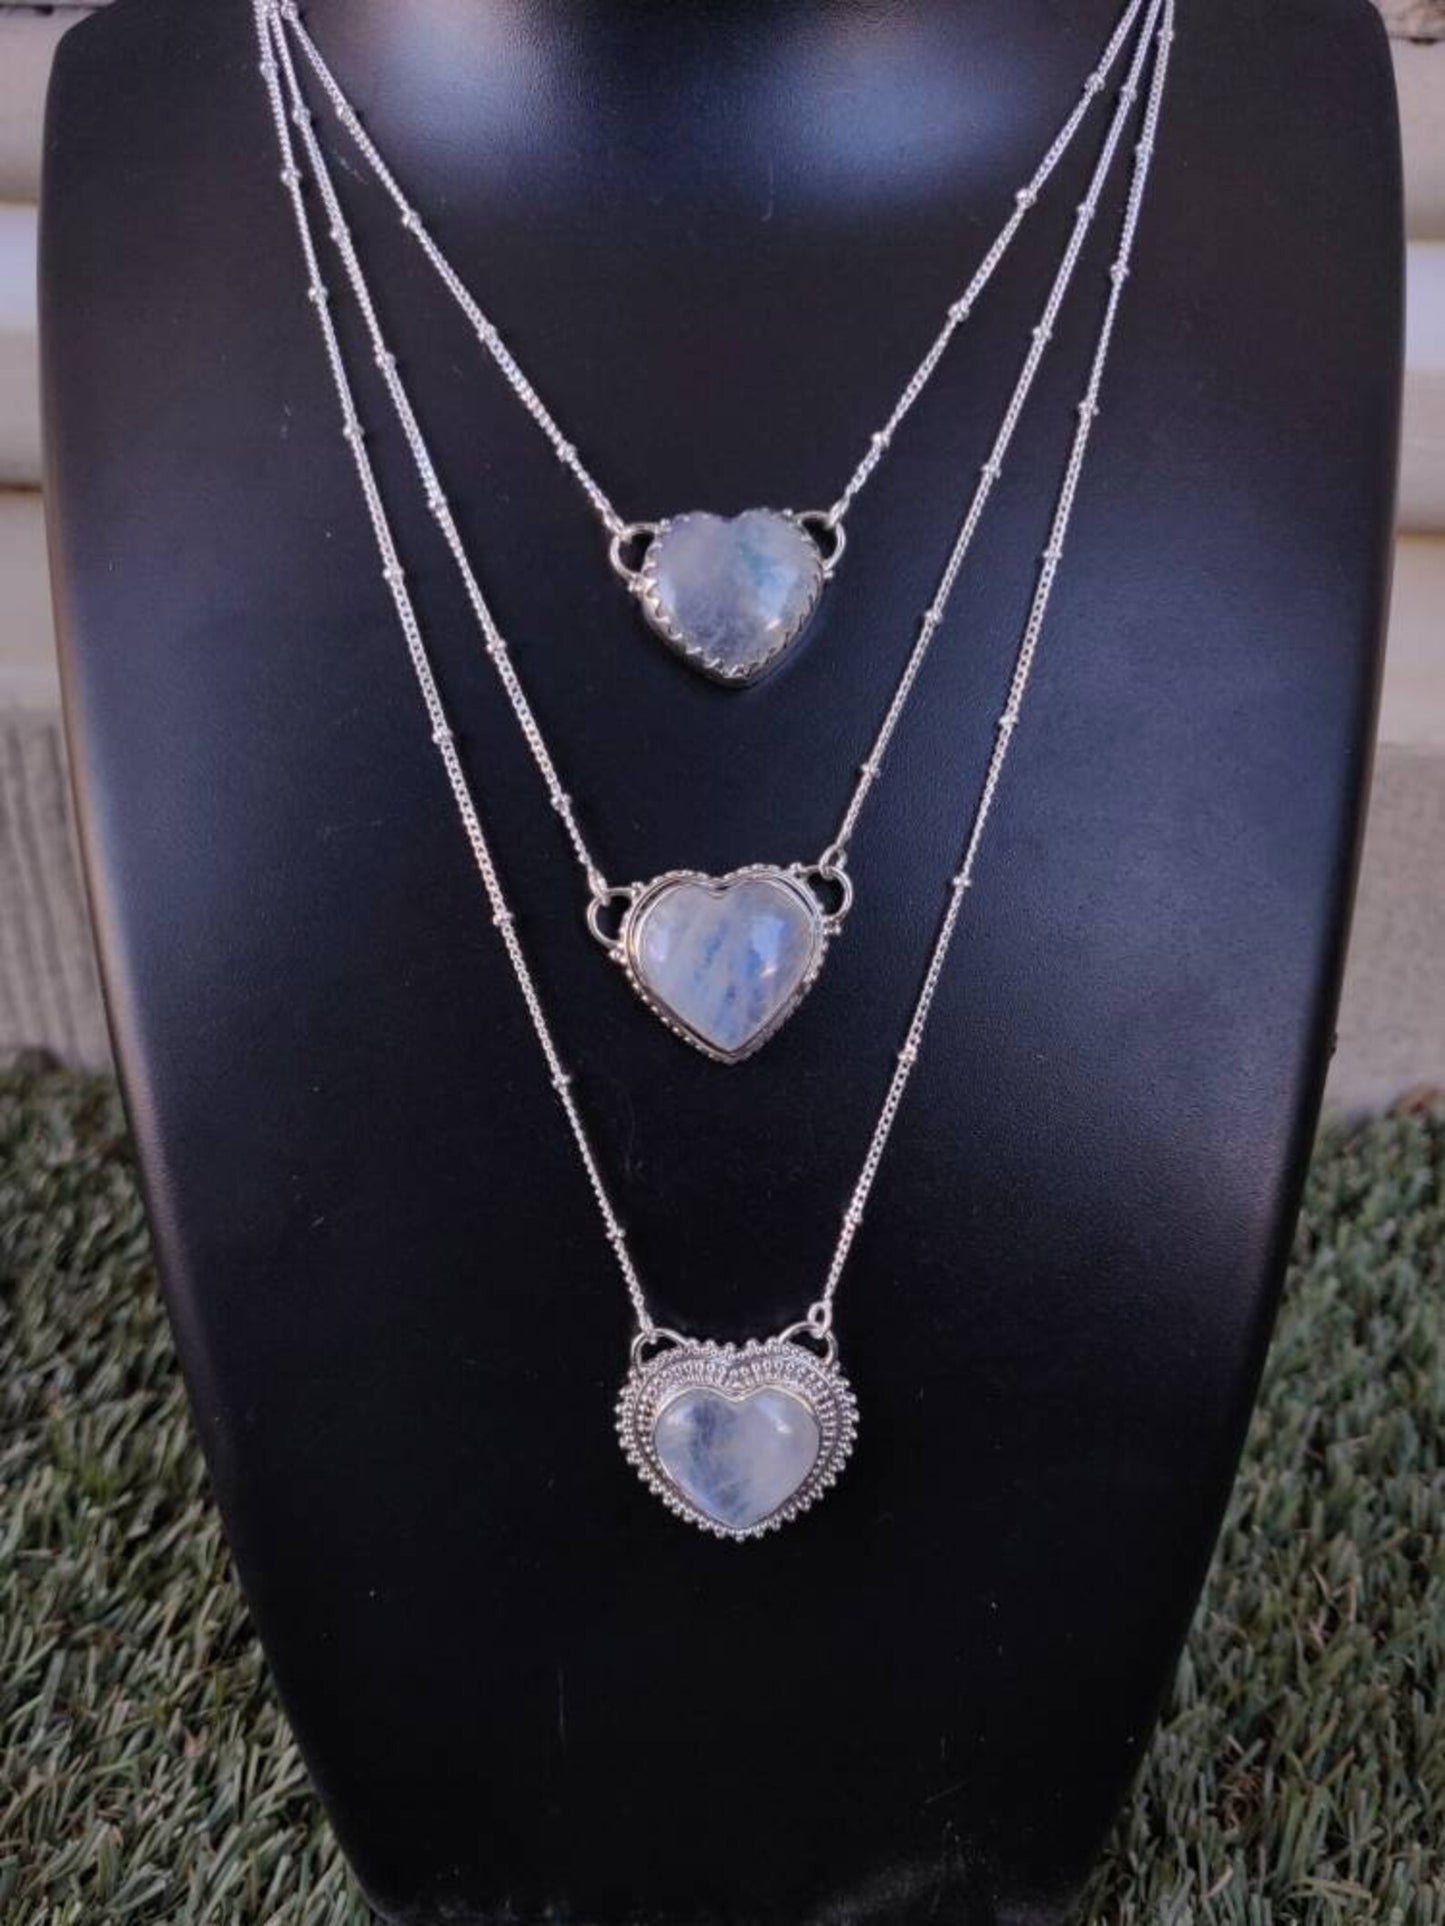 Natural Large Heart Cut Rainbow Moonstone Southwestern Style Necklace - 925 Solid Sterling Silver Necklace